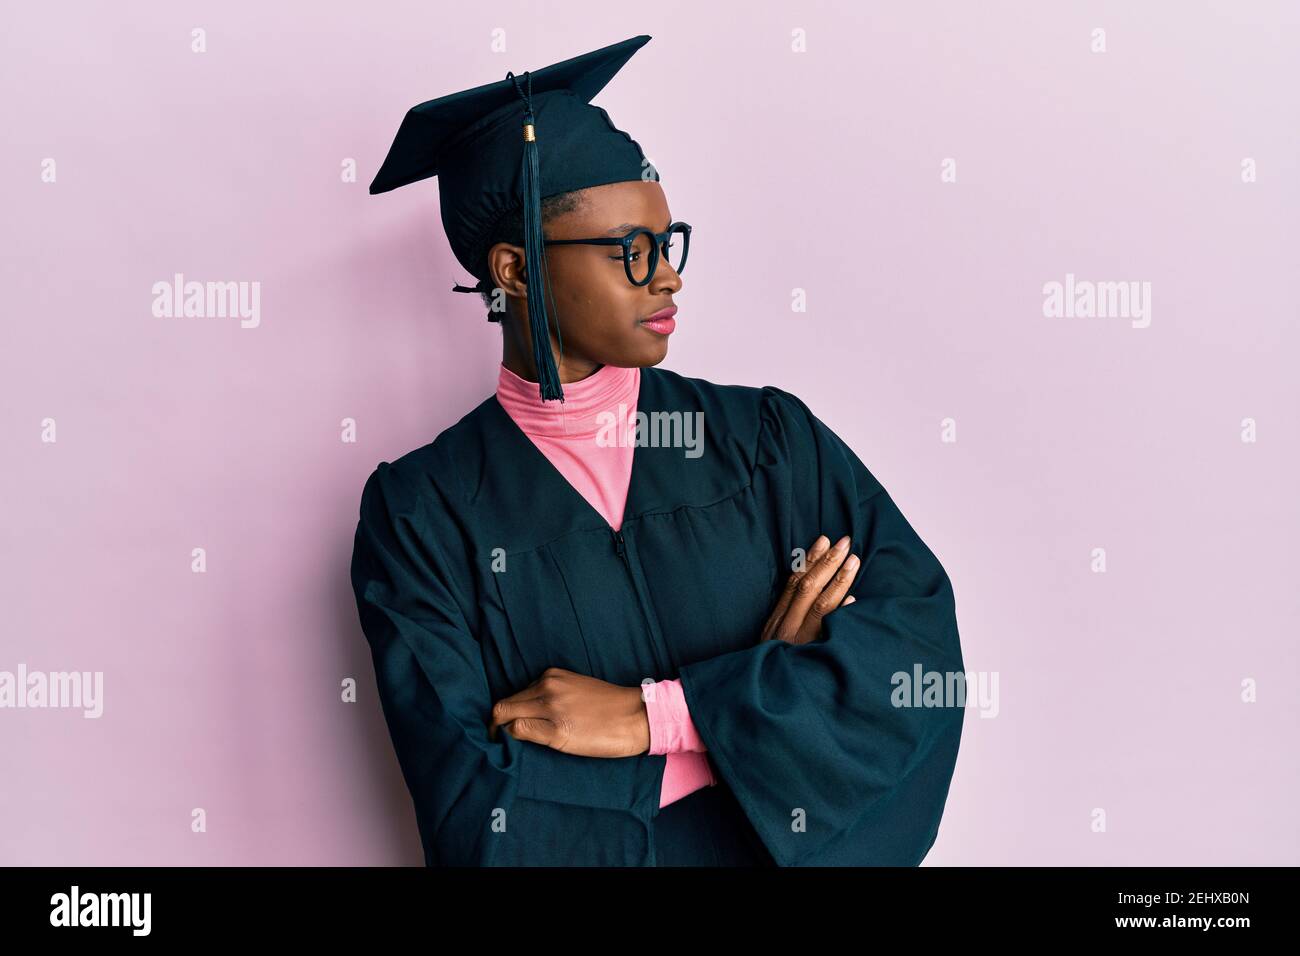 Young african american girl wearing graduation cap and ceremony robe looking to the side with arms crossed convinced and confident Stock Photo